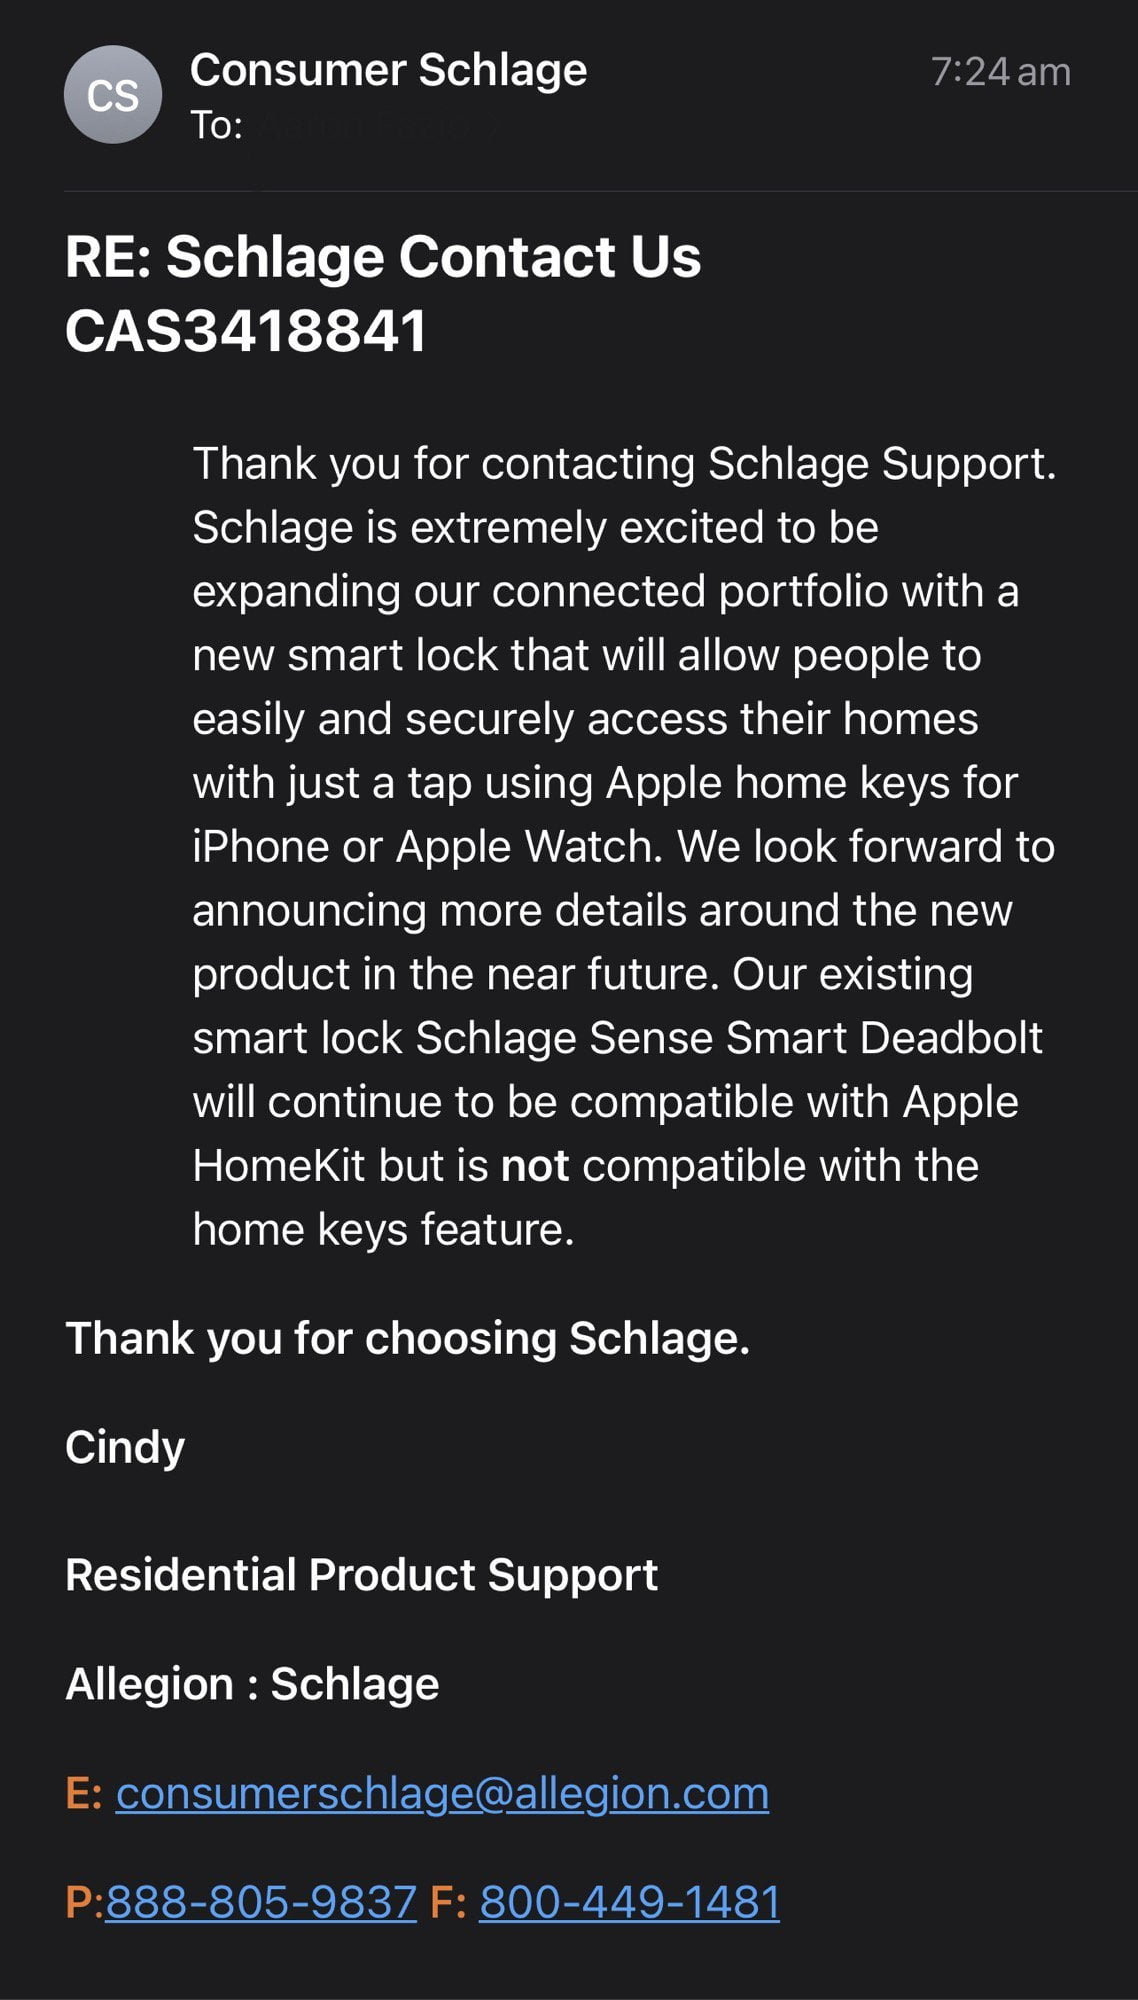 Current Schlage locks will not accept the Home key